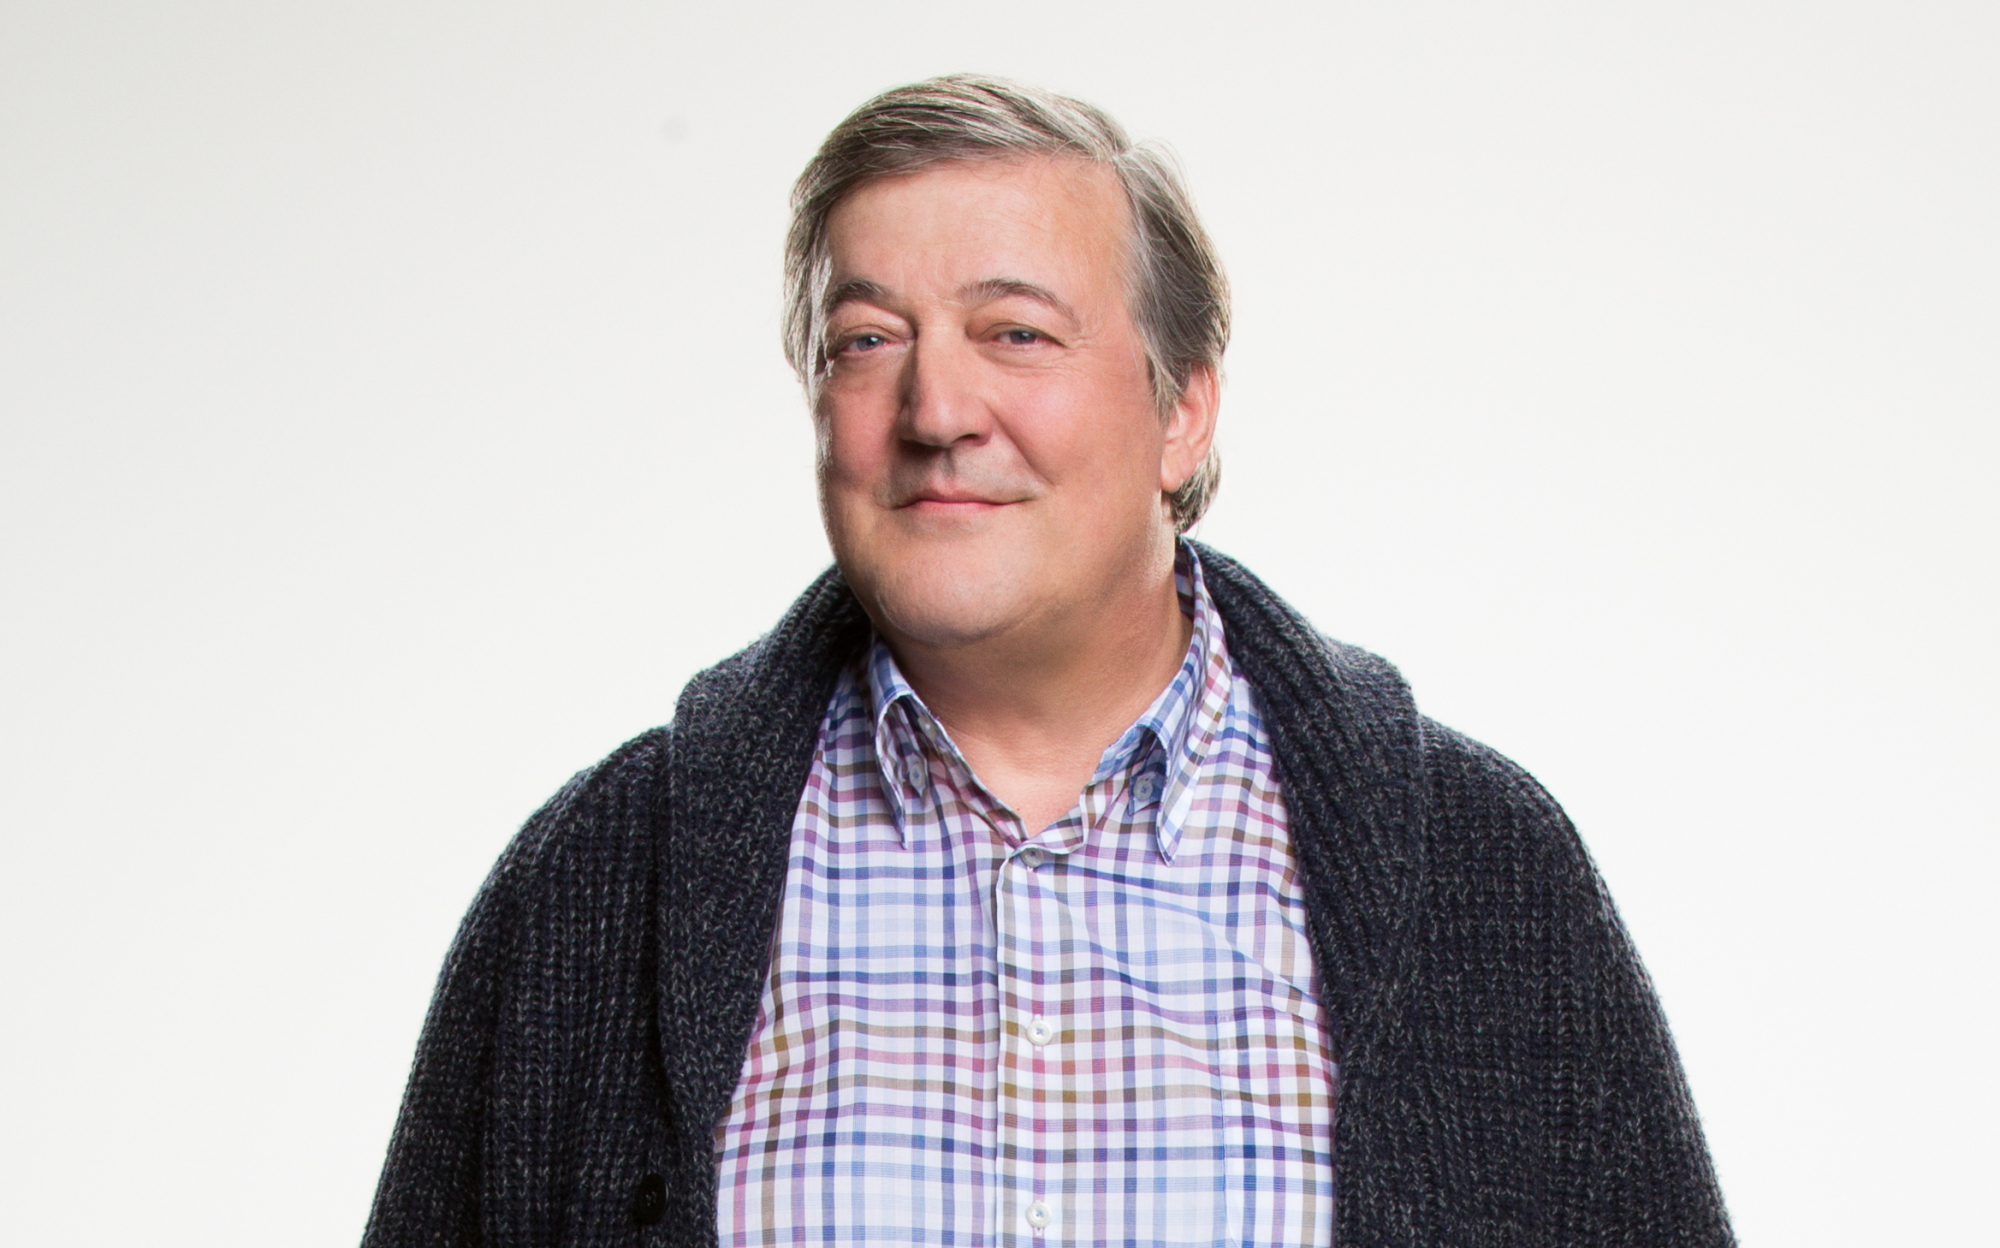 Stephen Fry as Roland in "The Great Indoors" on April 18, 2016. | Source: Getty Images